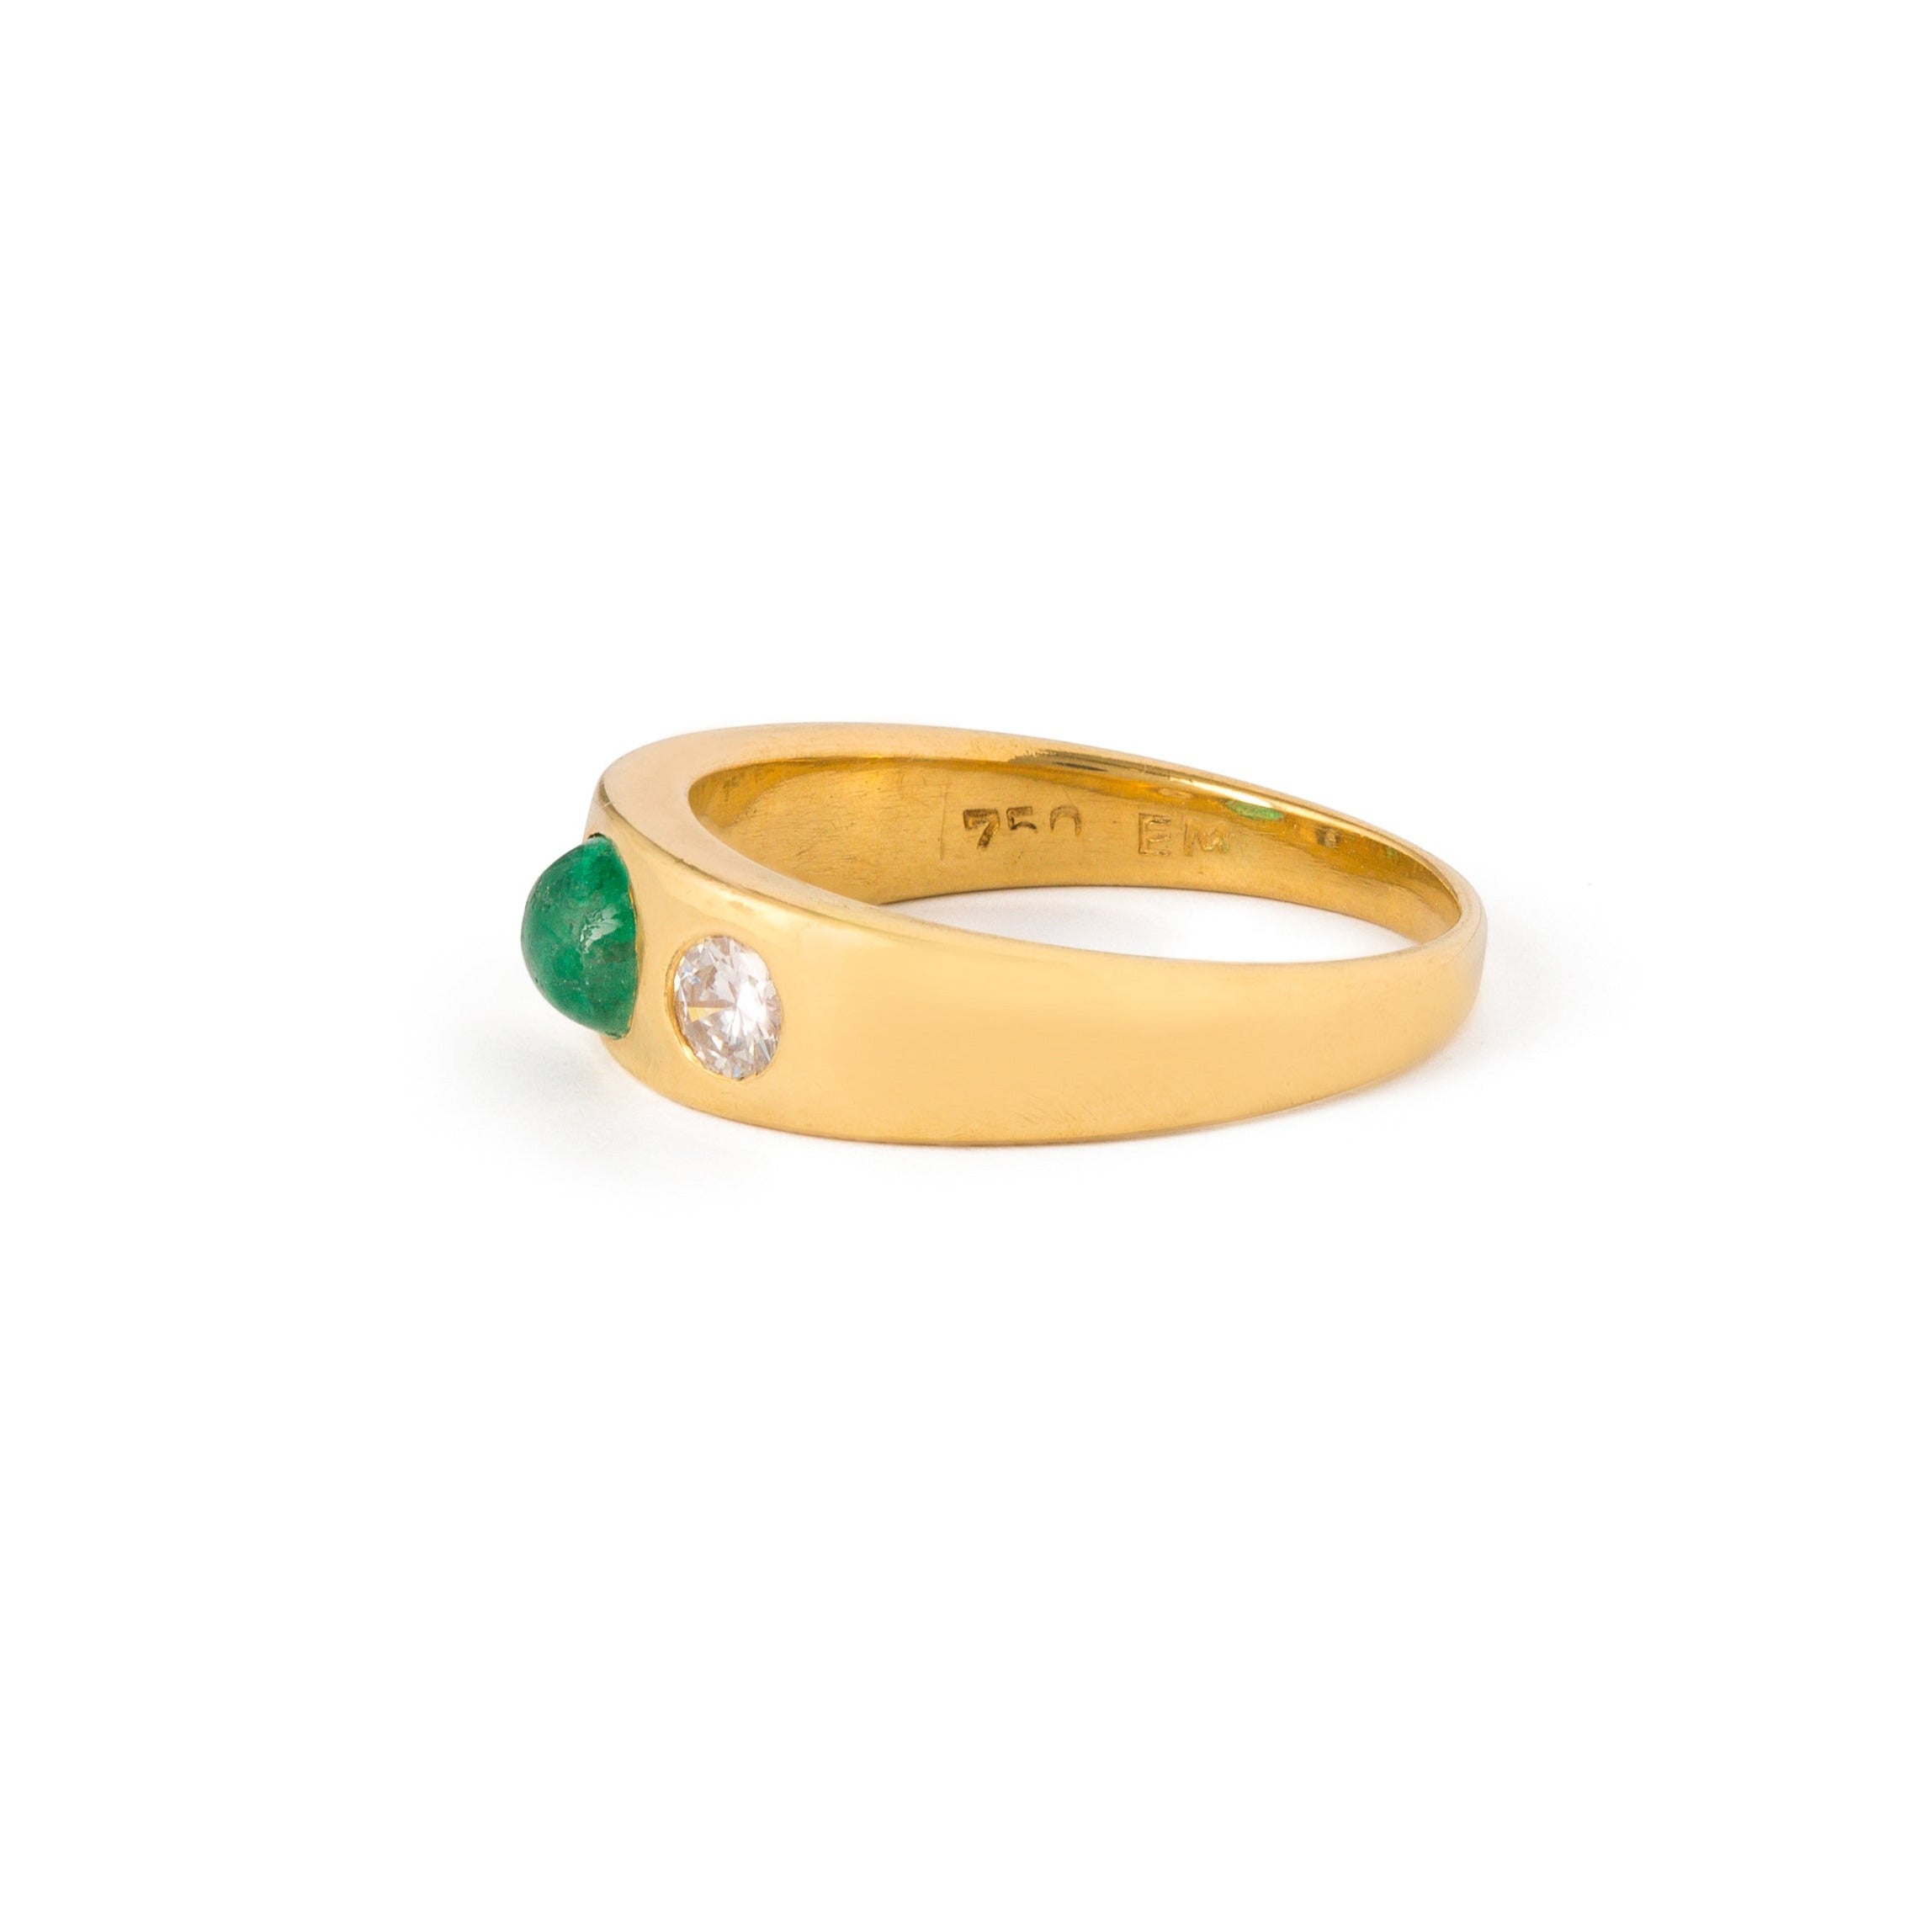 Emerald Cabochon, Diamond, and 18k Gold Ring